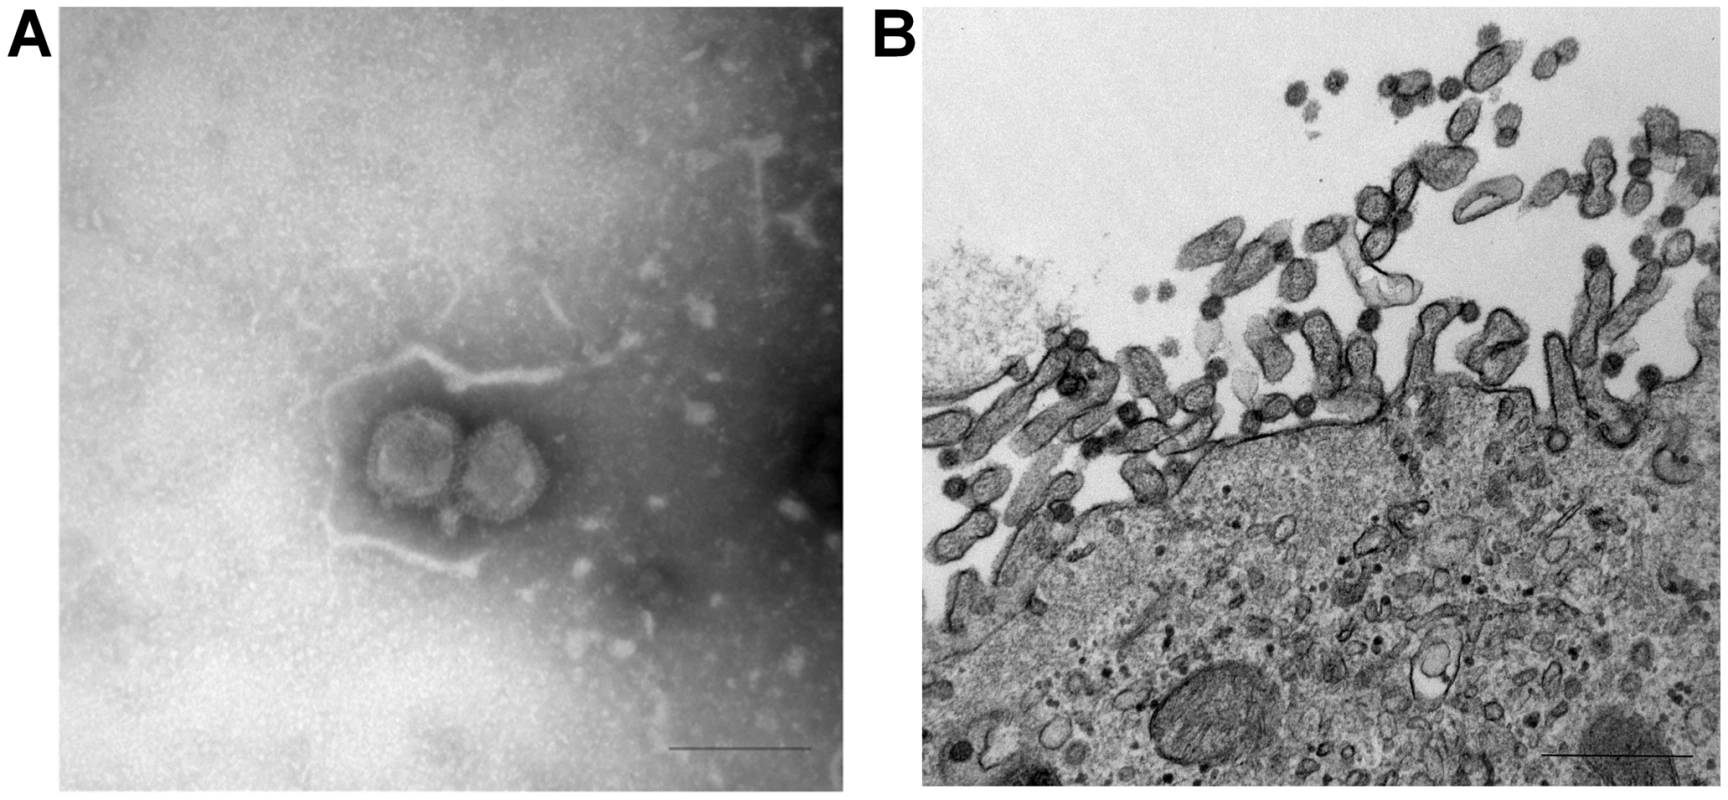 Ultrastructural analysis of C/OK virus isolate in cell culture as observed by negative stain (A) and thin-section (B) electron microscopy.